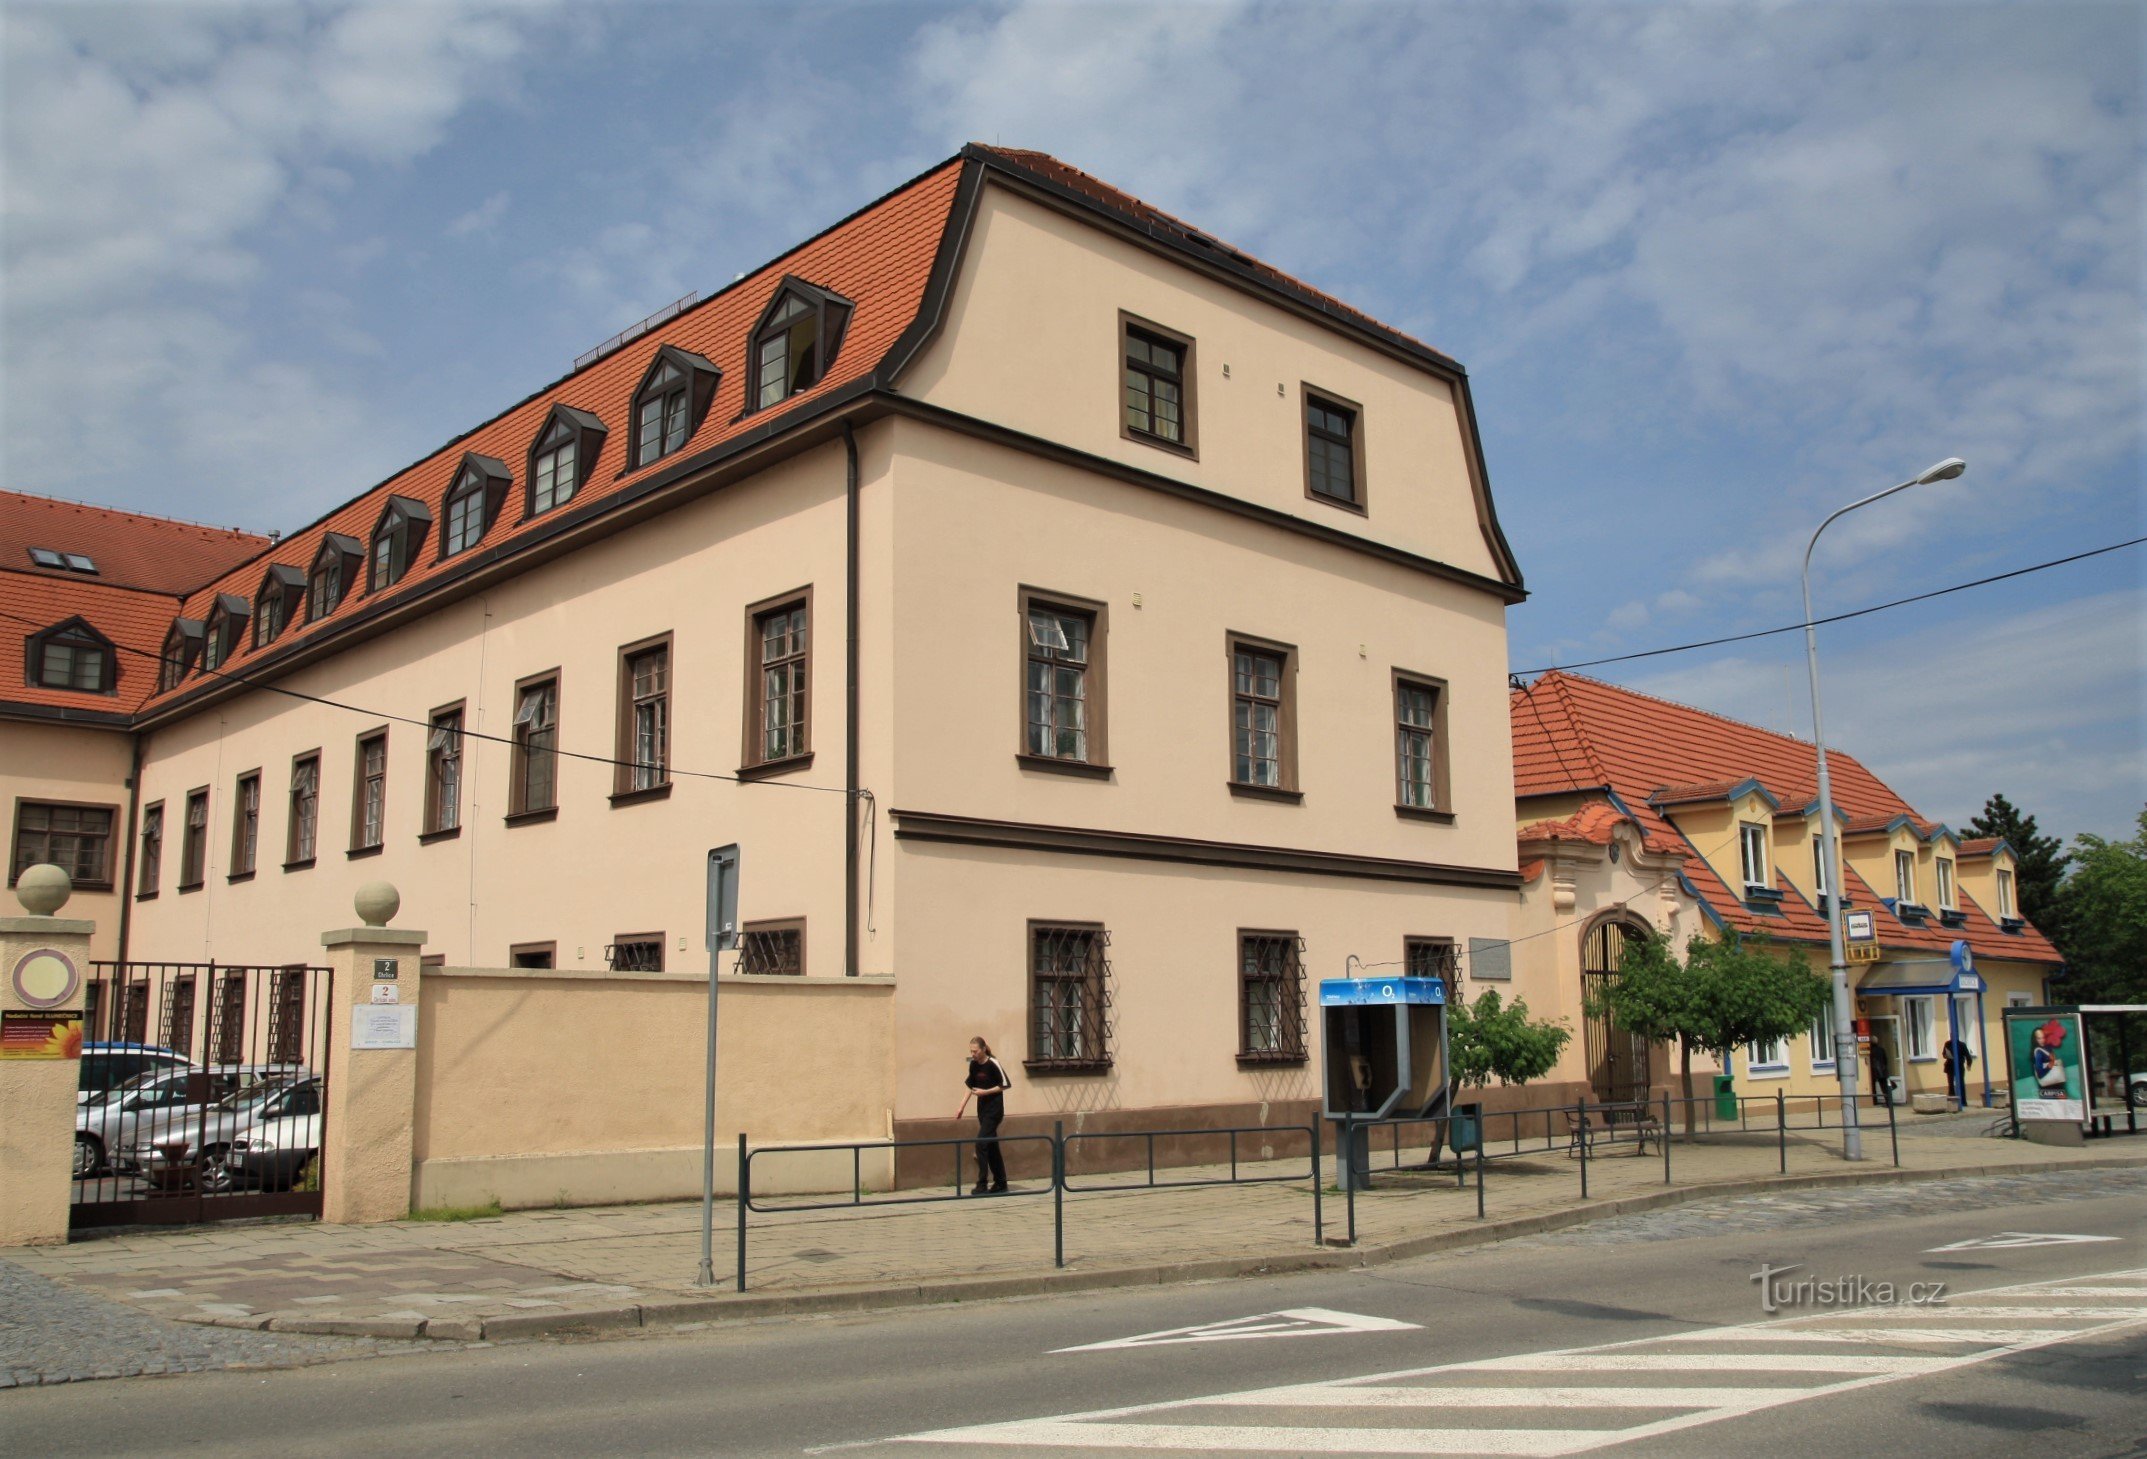 The building of the former archbishop's castle, today the Center for Social Services for Persons